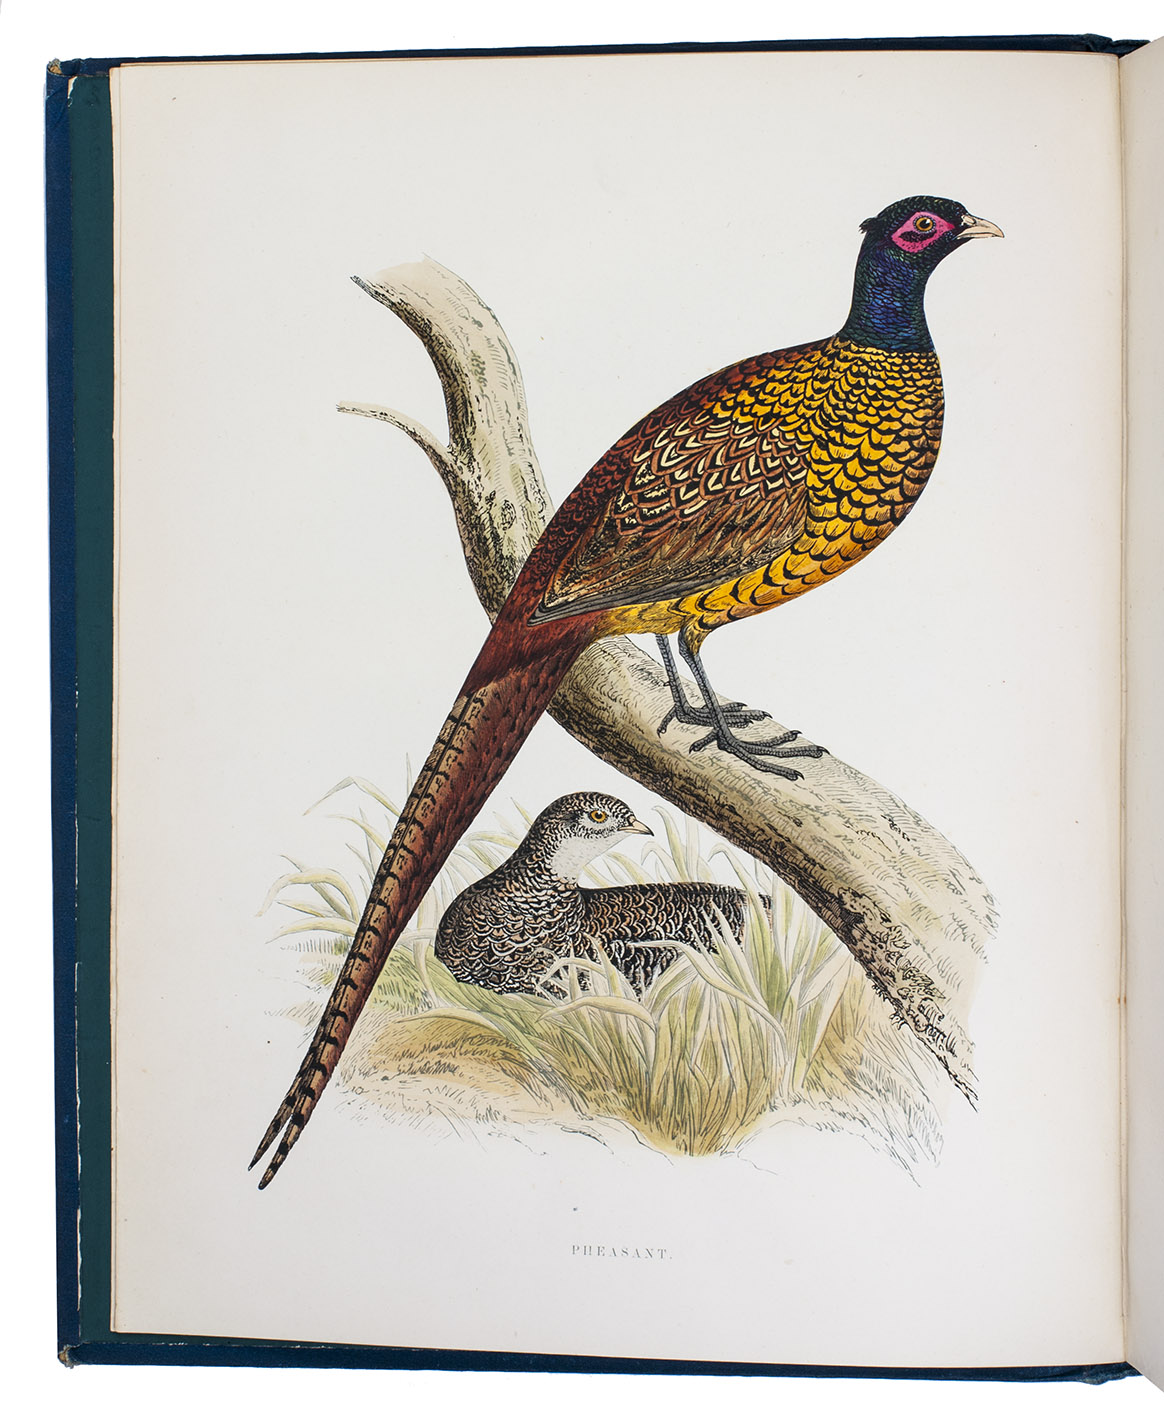 MORRIS, Beverley Robinson. - British game birds and wildfowl.London, Groombridge and sons (colophon: Benjamin Fawcett), [binding: 1889]. 4to. With 60 hand-coloured lithographed plates by Bernjamin Fawcett. Original publisher's blue cloth, with title and decorations in gold.